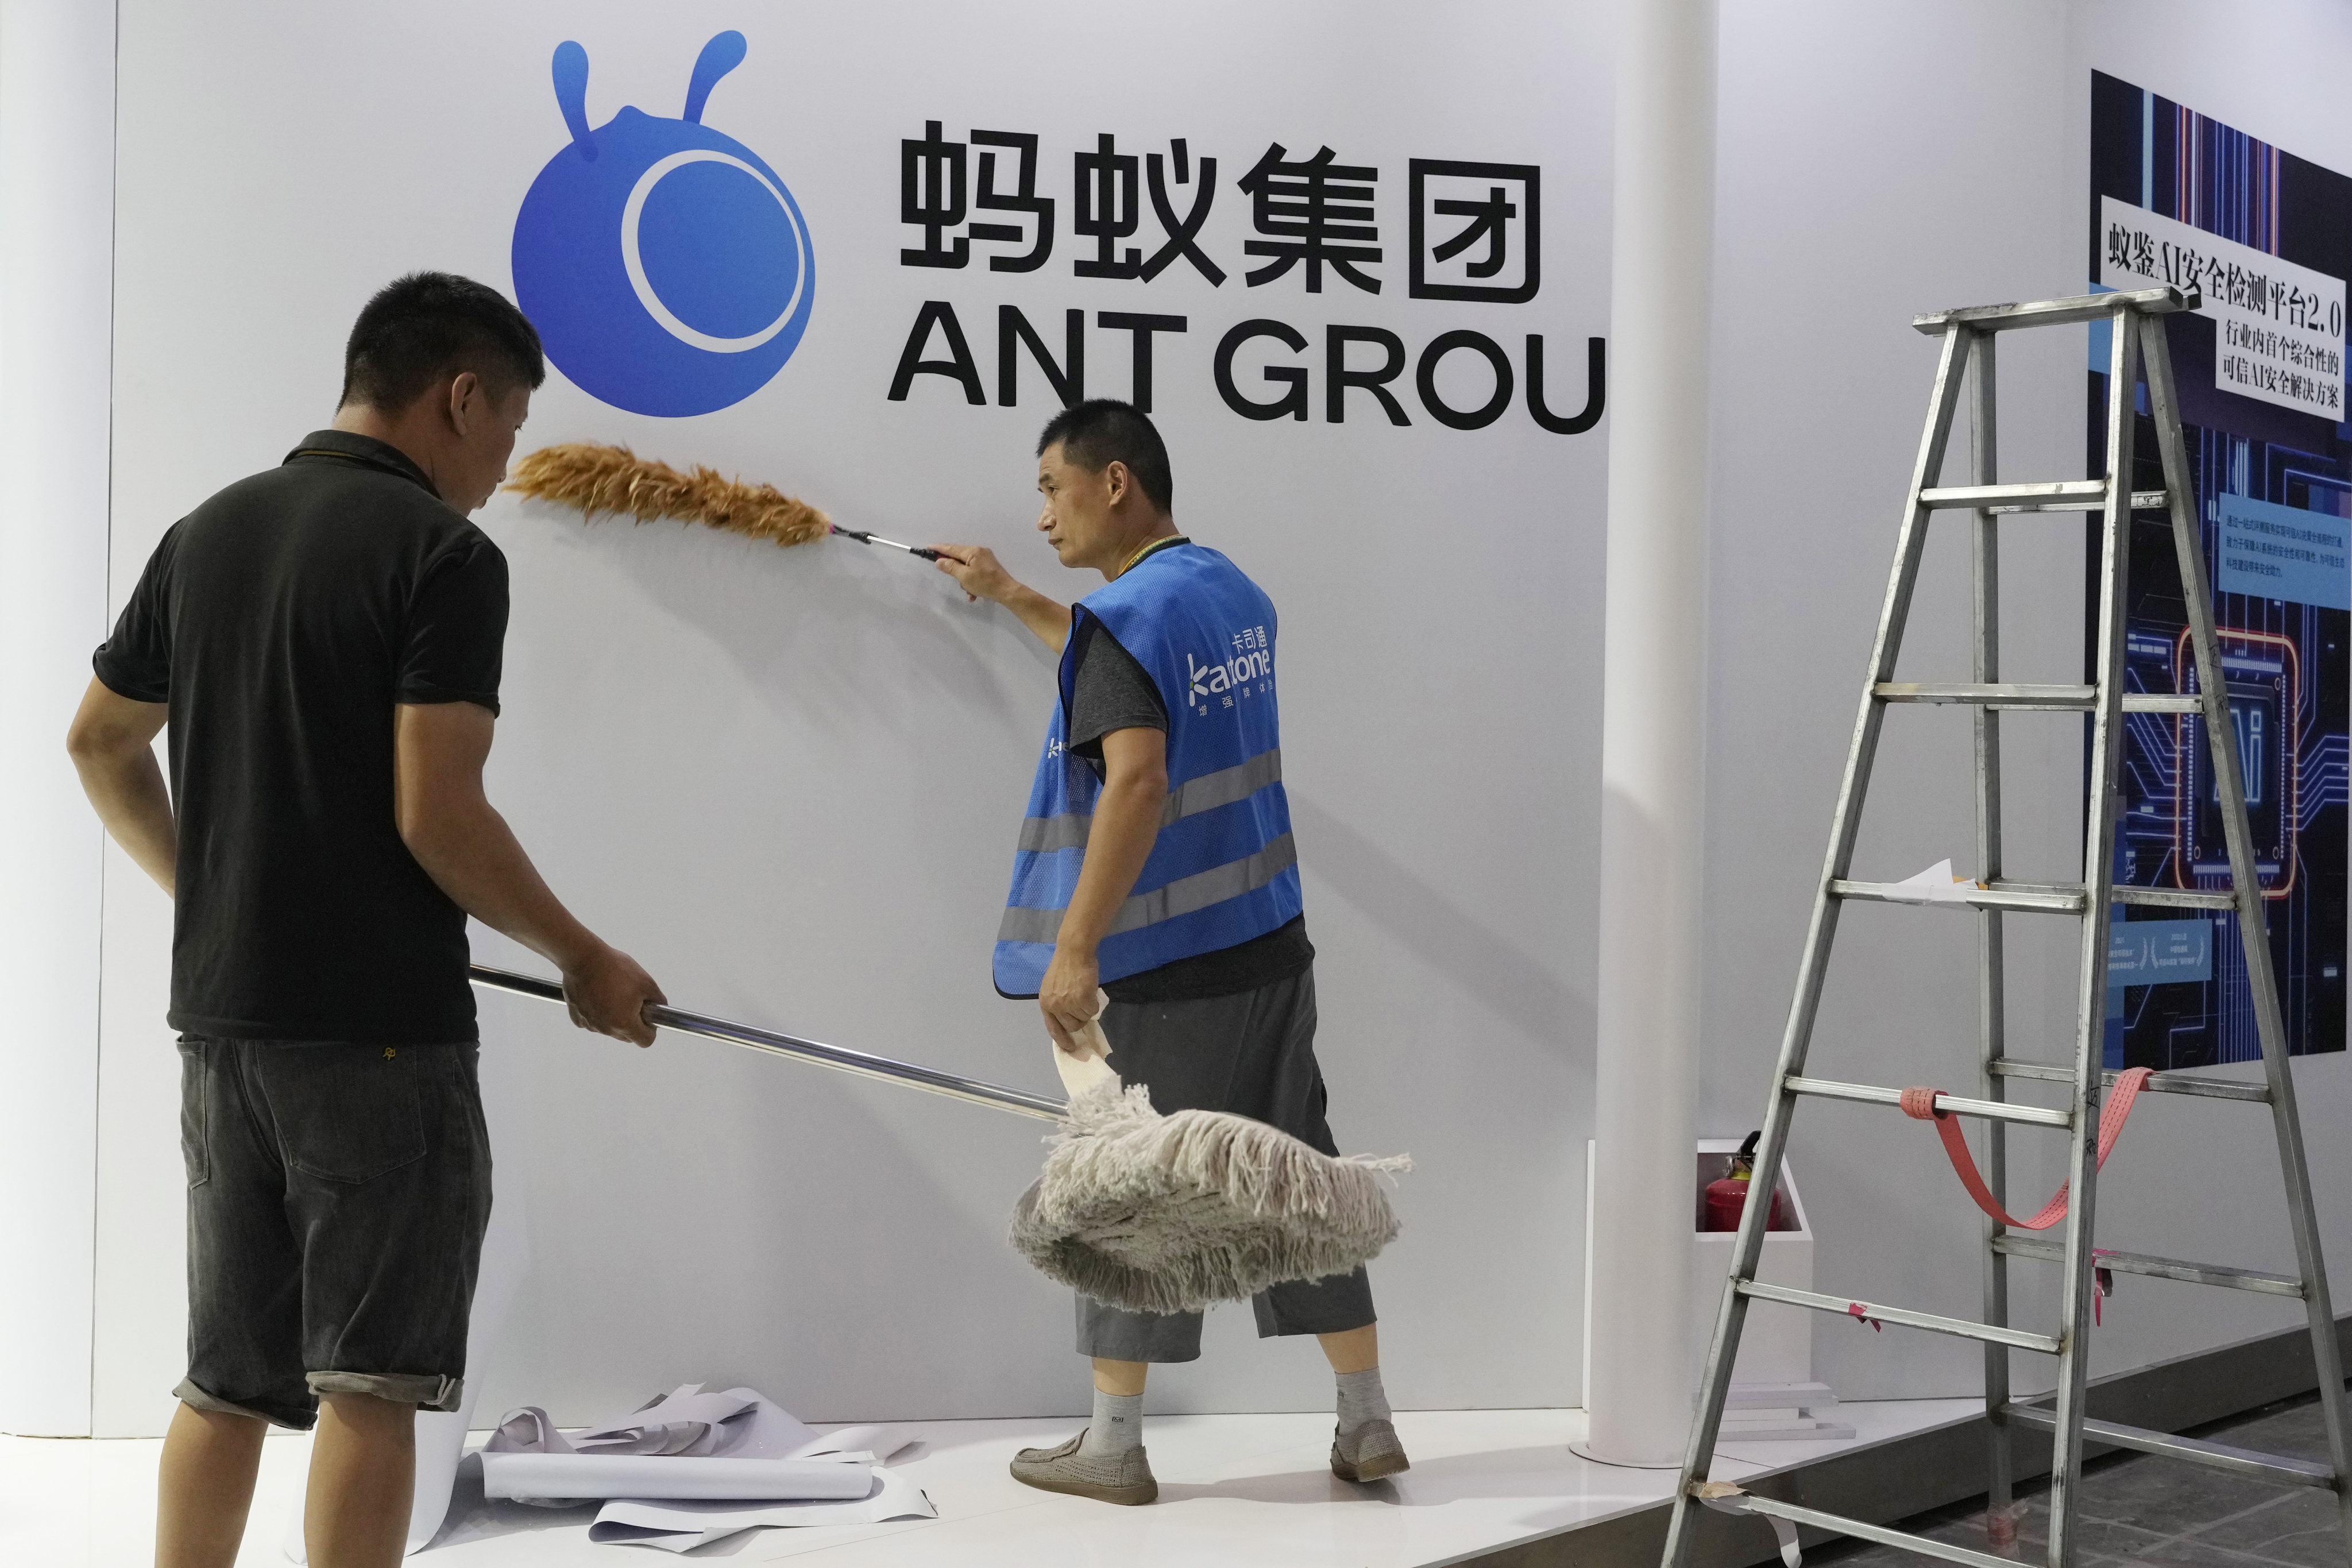 Ant Group Concludes Regulatory Overhaul in China with Record-breaking $984 Million Fine